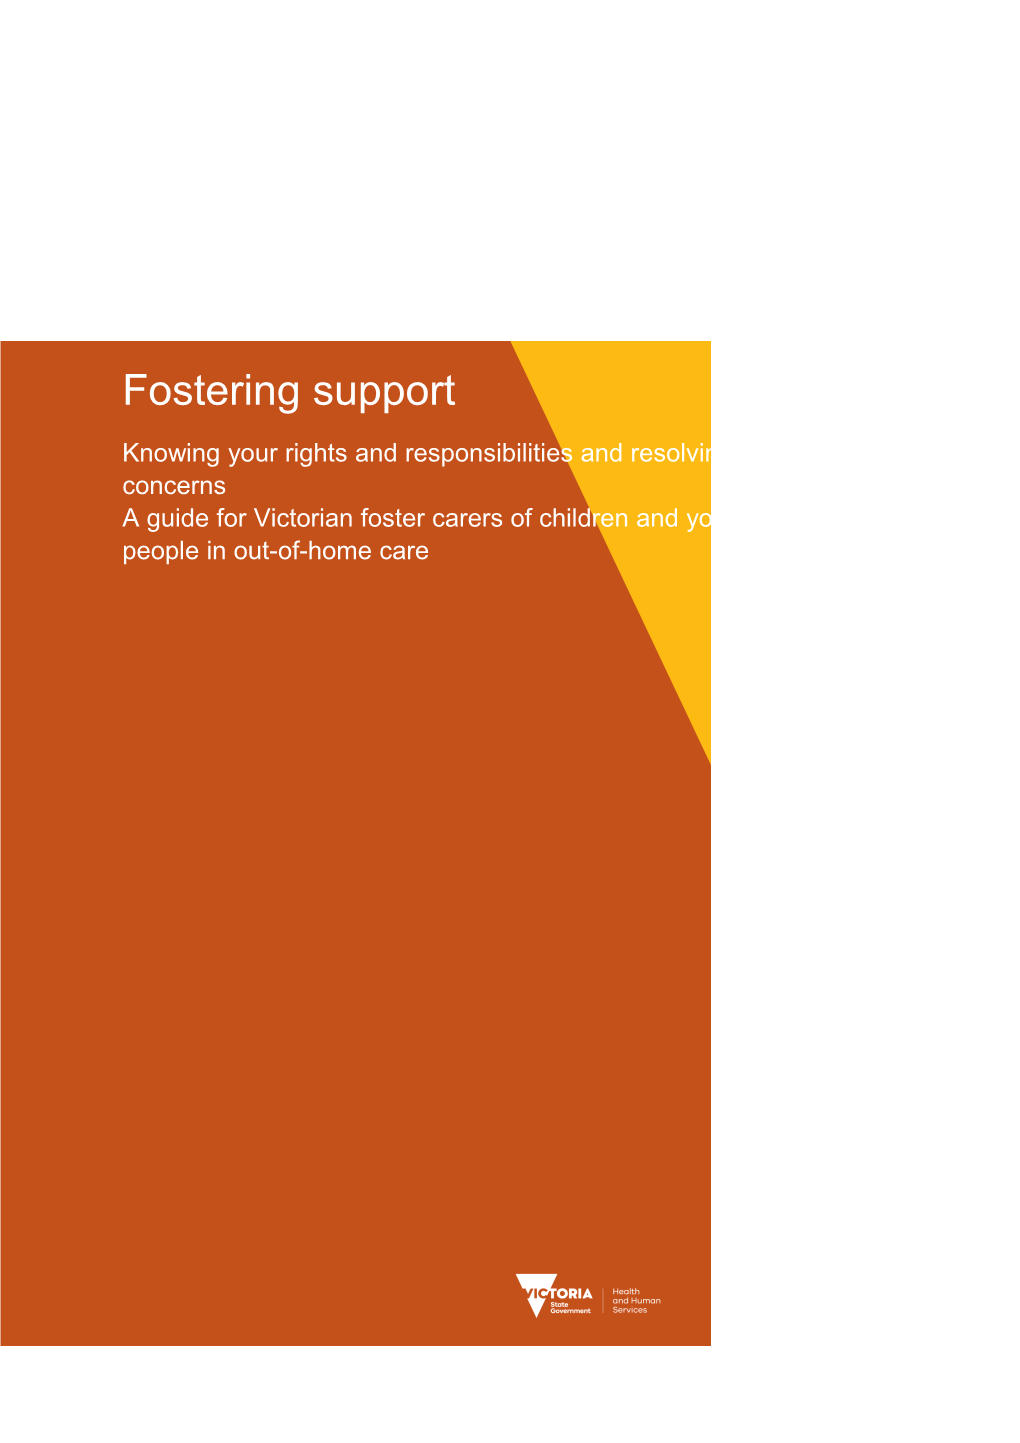 Fostering Support: Knowing Your Rights and Responsibilites and Resolving Concens - a Guide